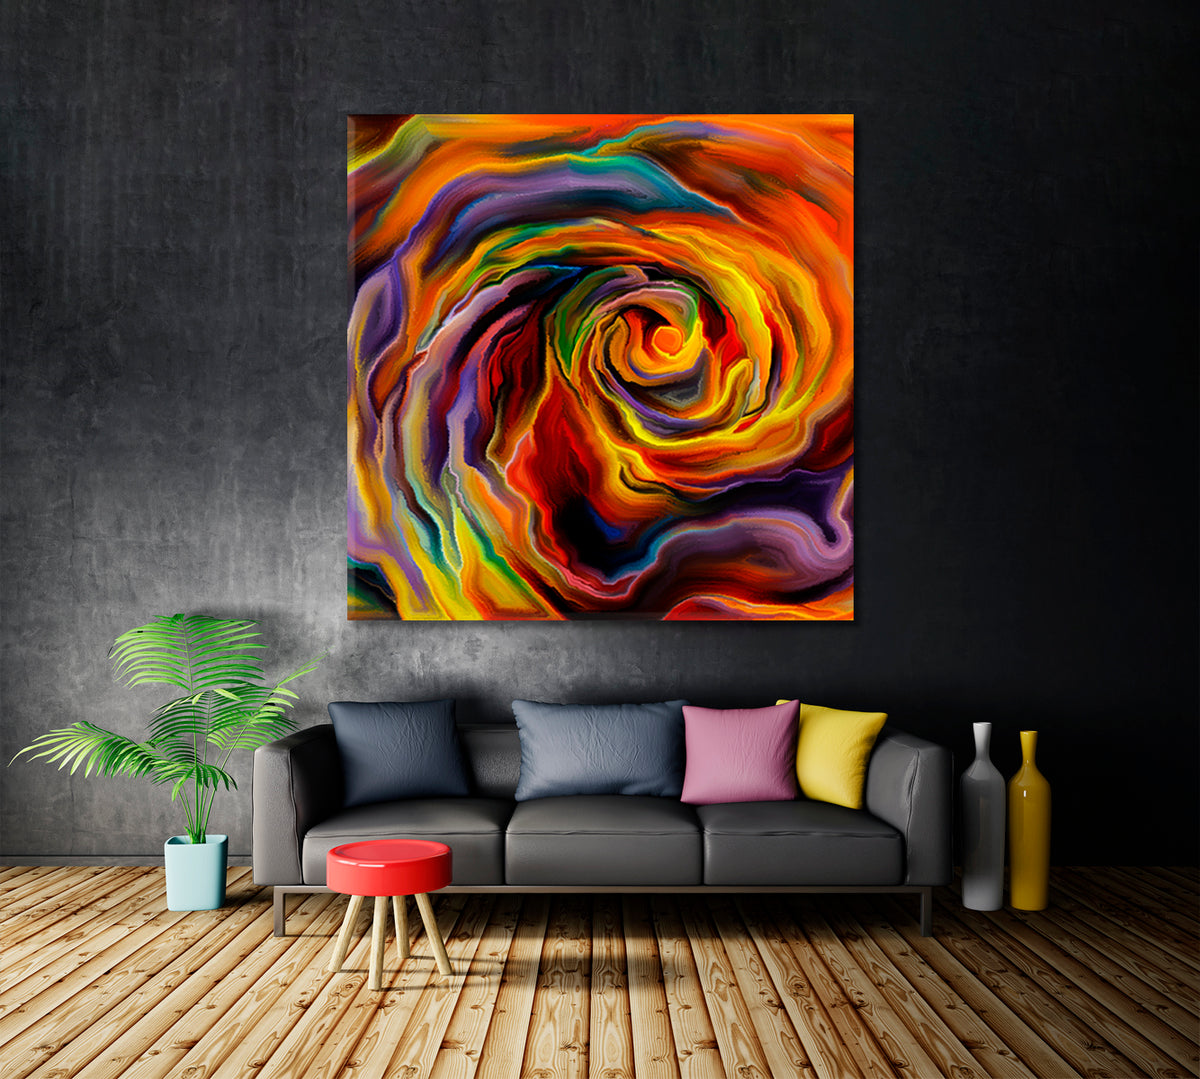 FORMS Magical Abstract Vivid Whirlpool - Square Panel Contemporary Art Artesty 1 Panel 12"x12" 